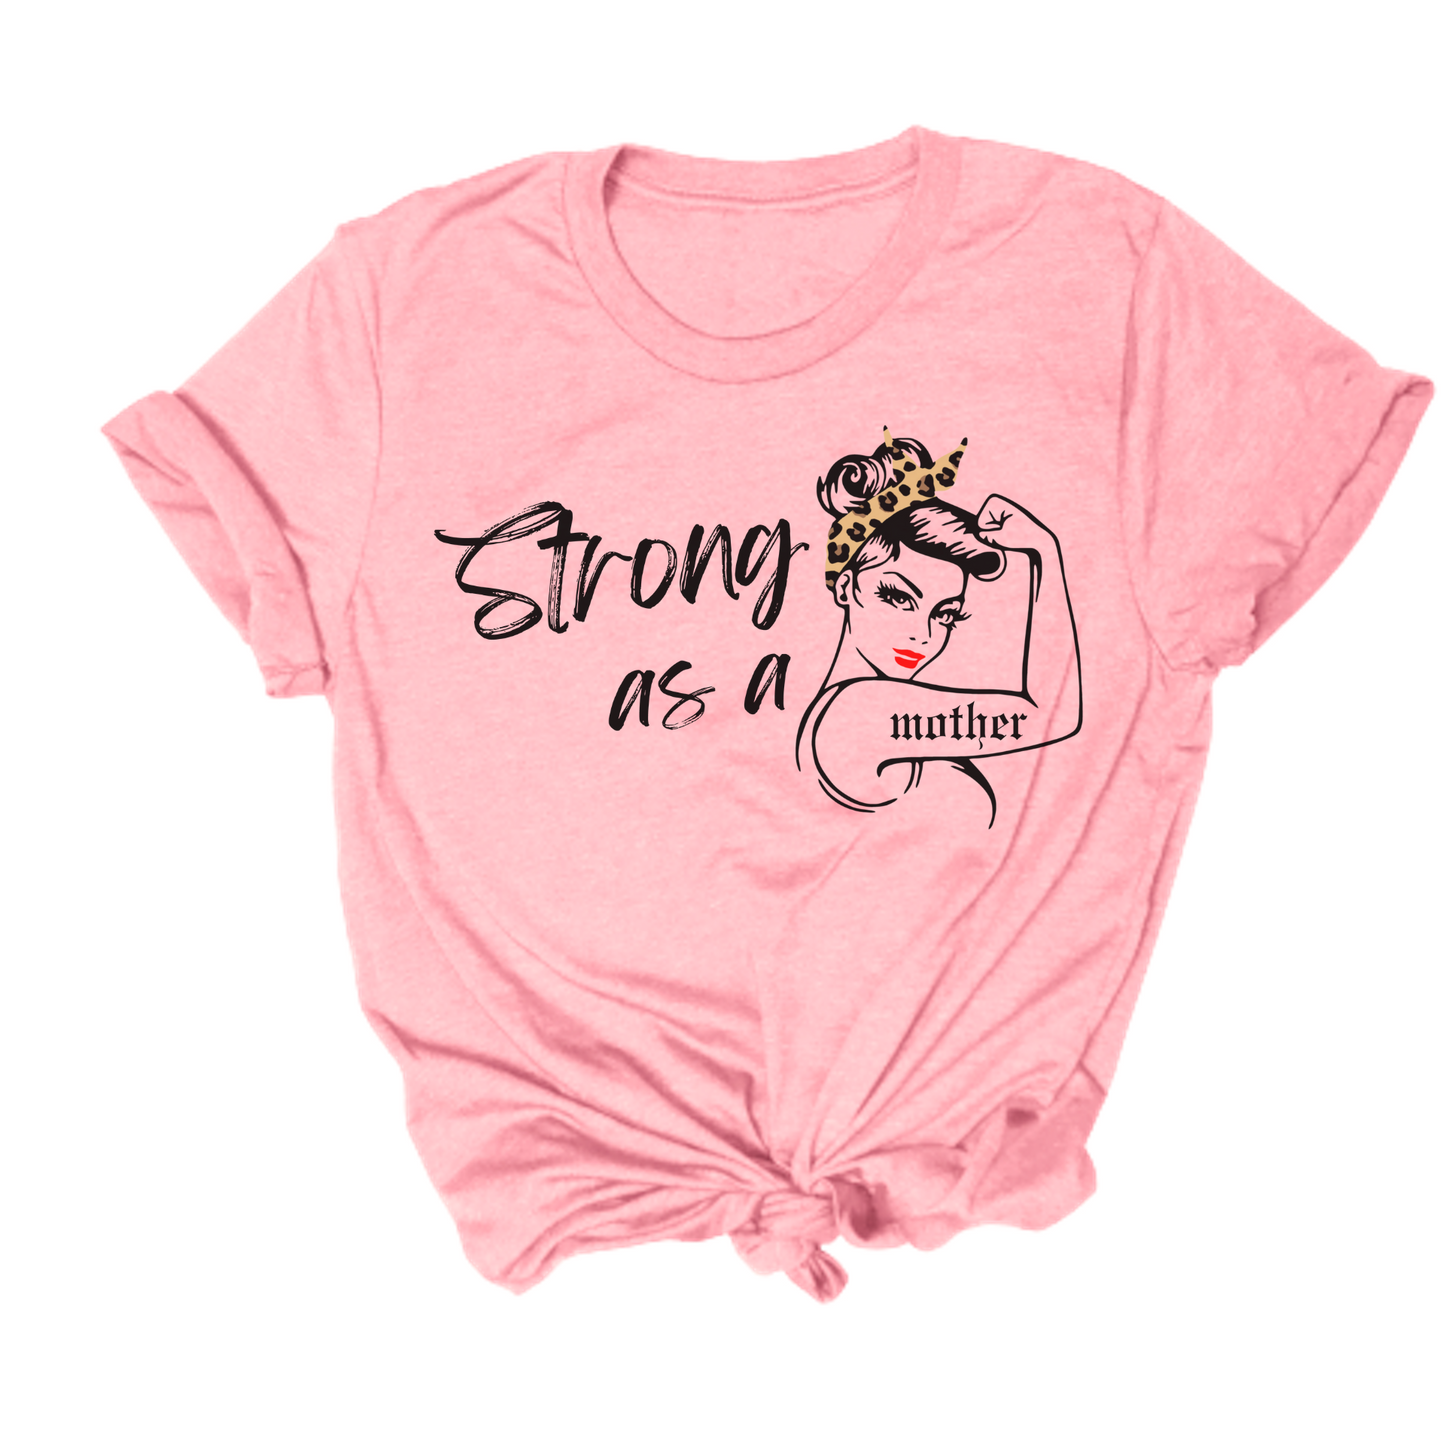 Strong as A Mother Tee